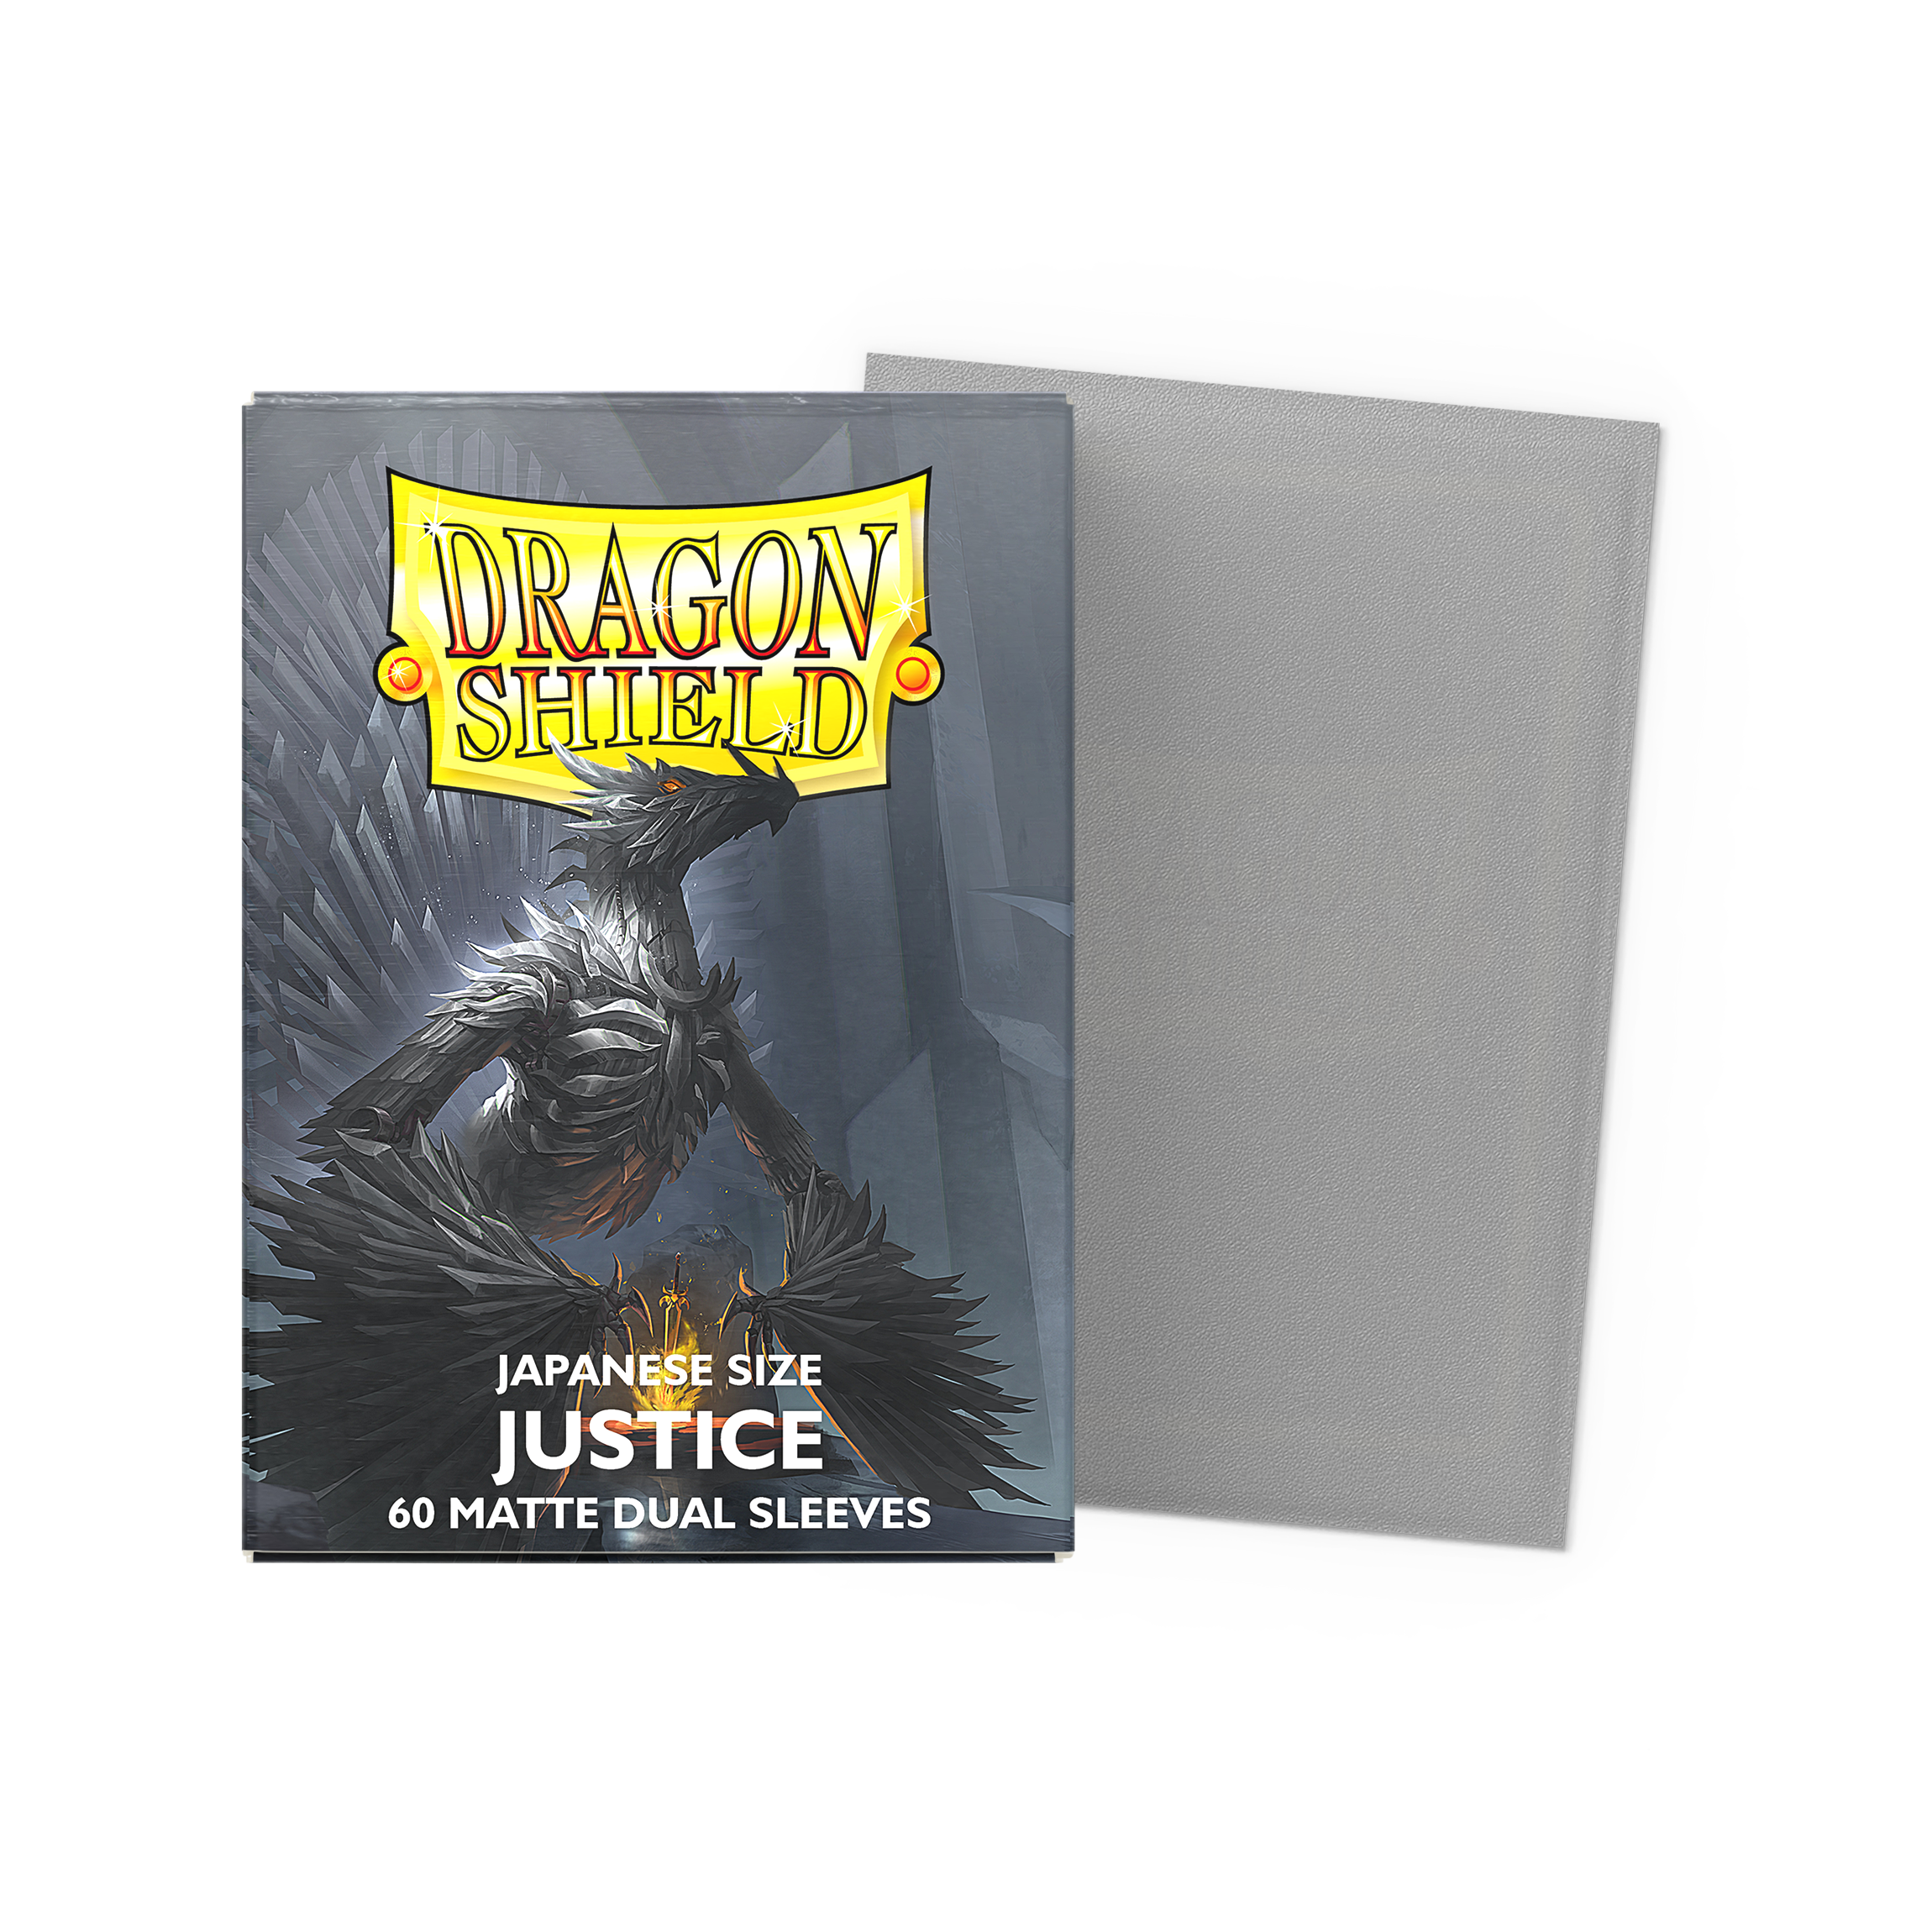 Japanese size double-sleeving!, 🇯🇵🐲 Japanese size double-sleeving is  here! 🇯🇵🐲 (+giveaway!🎁) 🤩🥳 Double-sleeving is the very best way to  protect your precious cards 🛡💎🐉 So we are proud